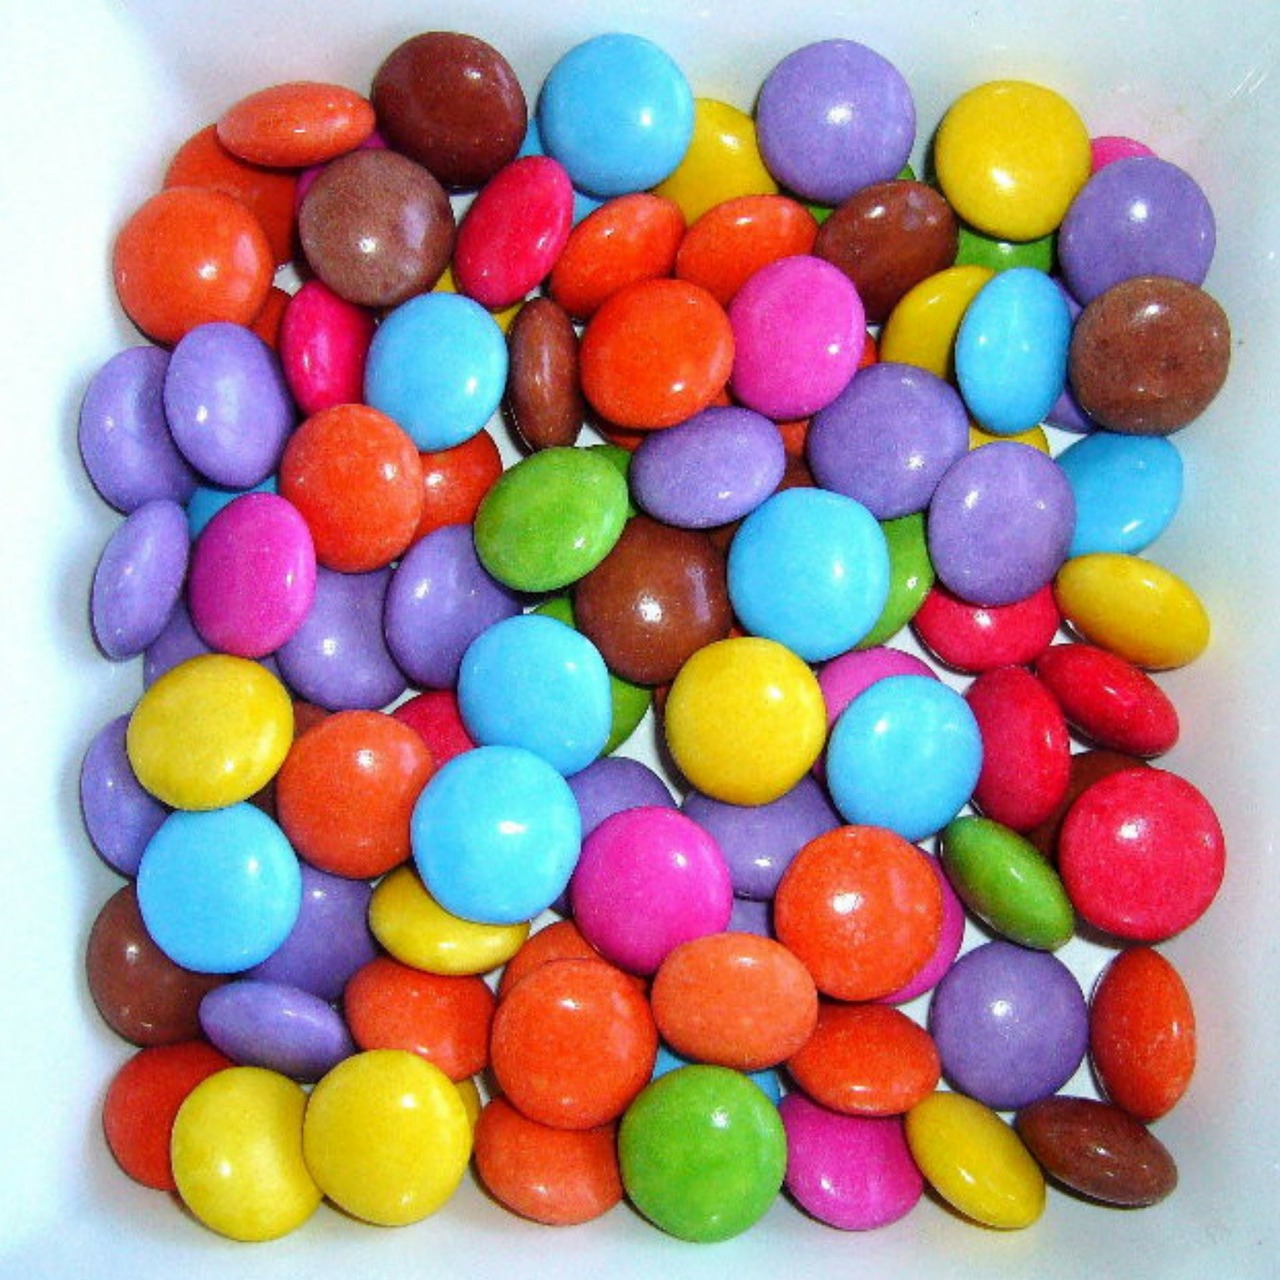 children's sweets candy smarties free photo